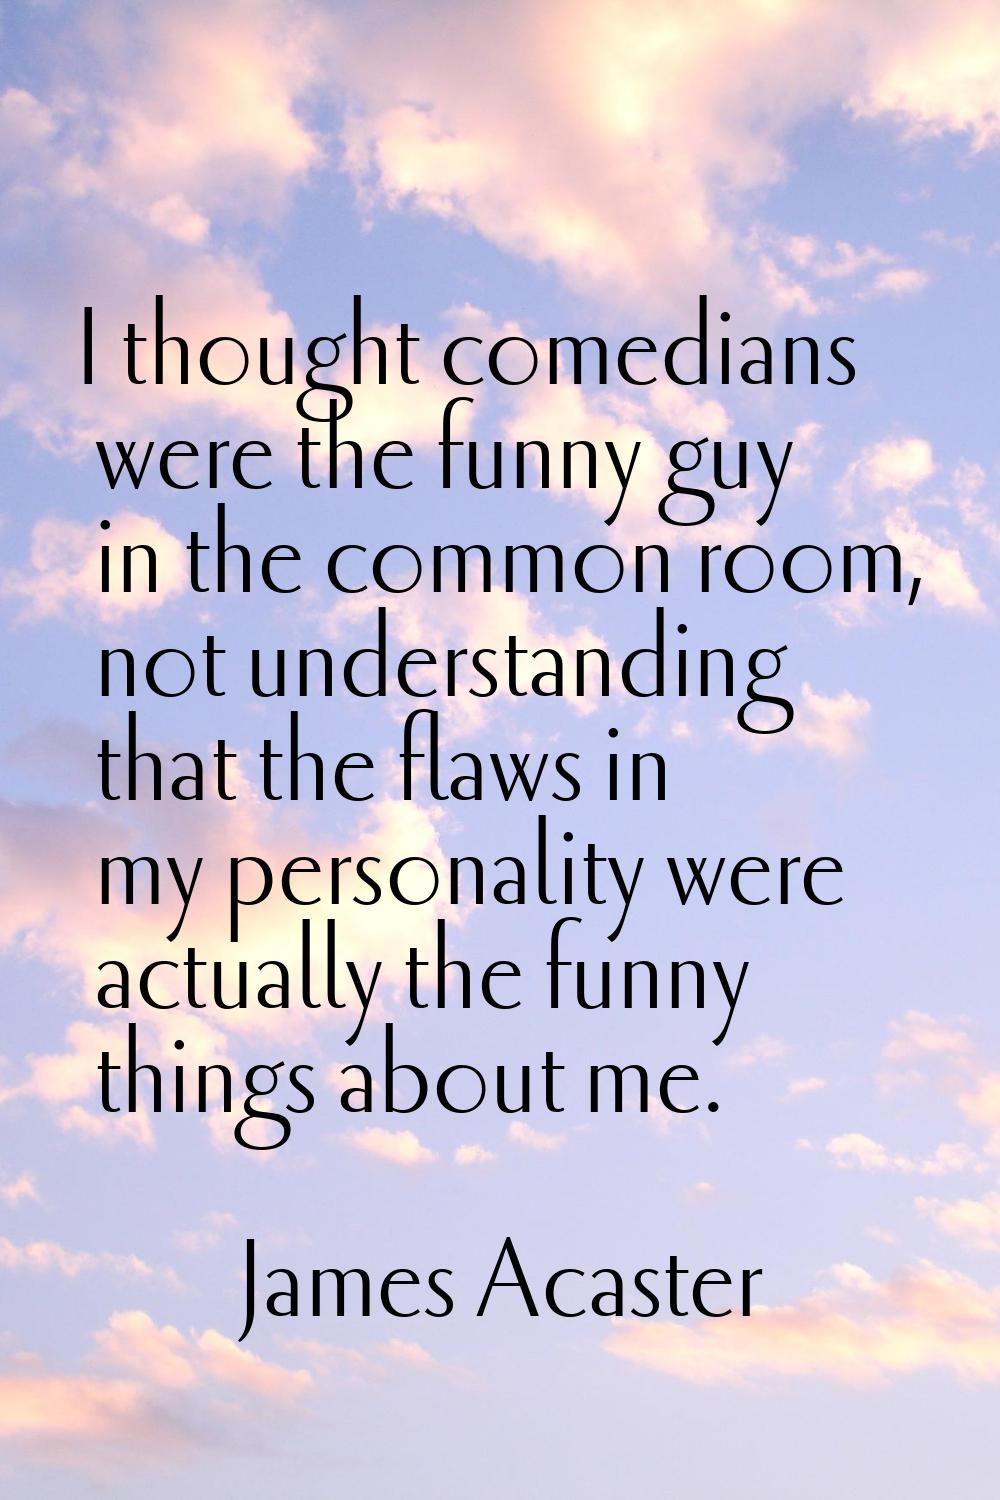 I thought comedians were the funny guy in the common room, not understanding that the flaws in my p